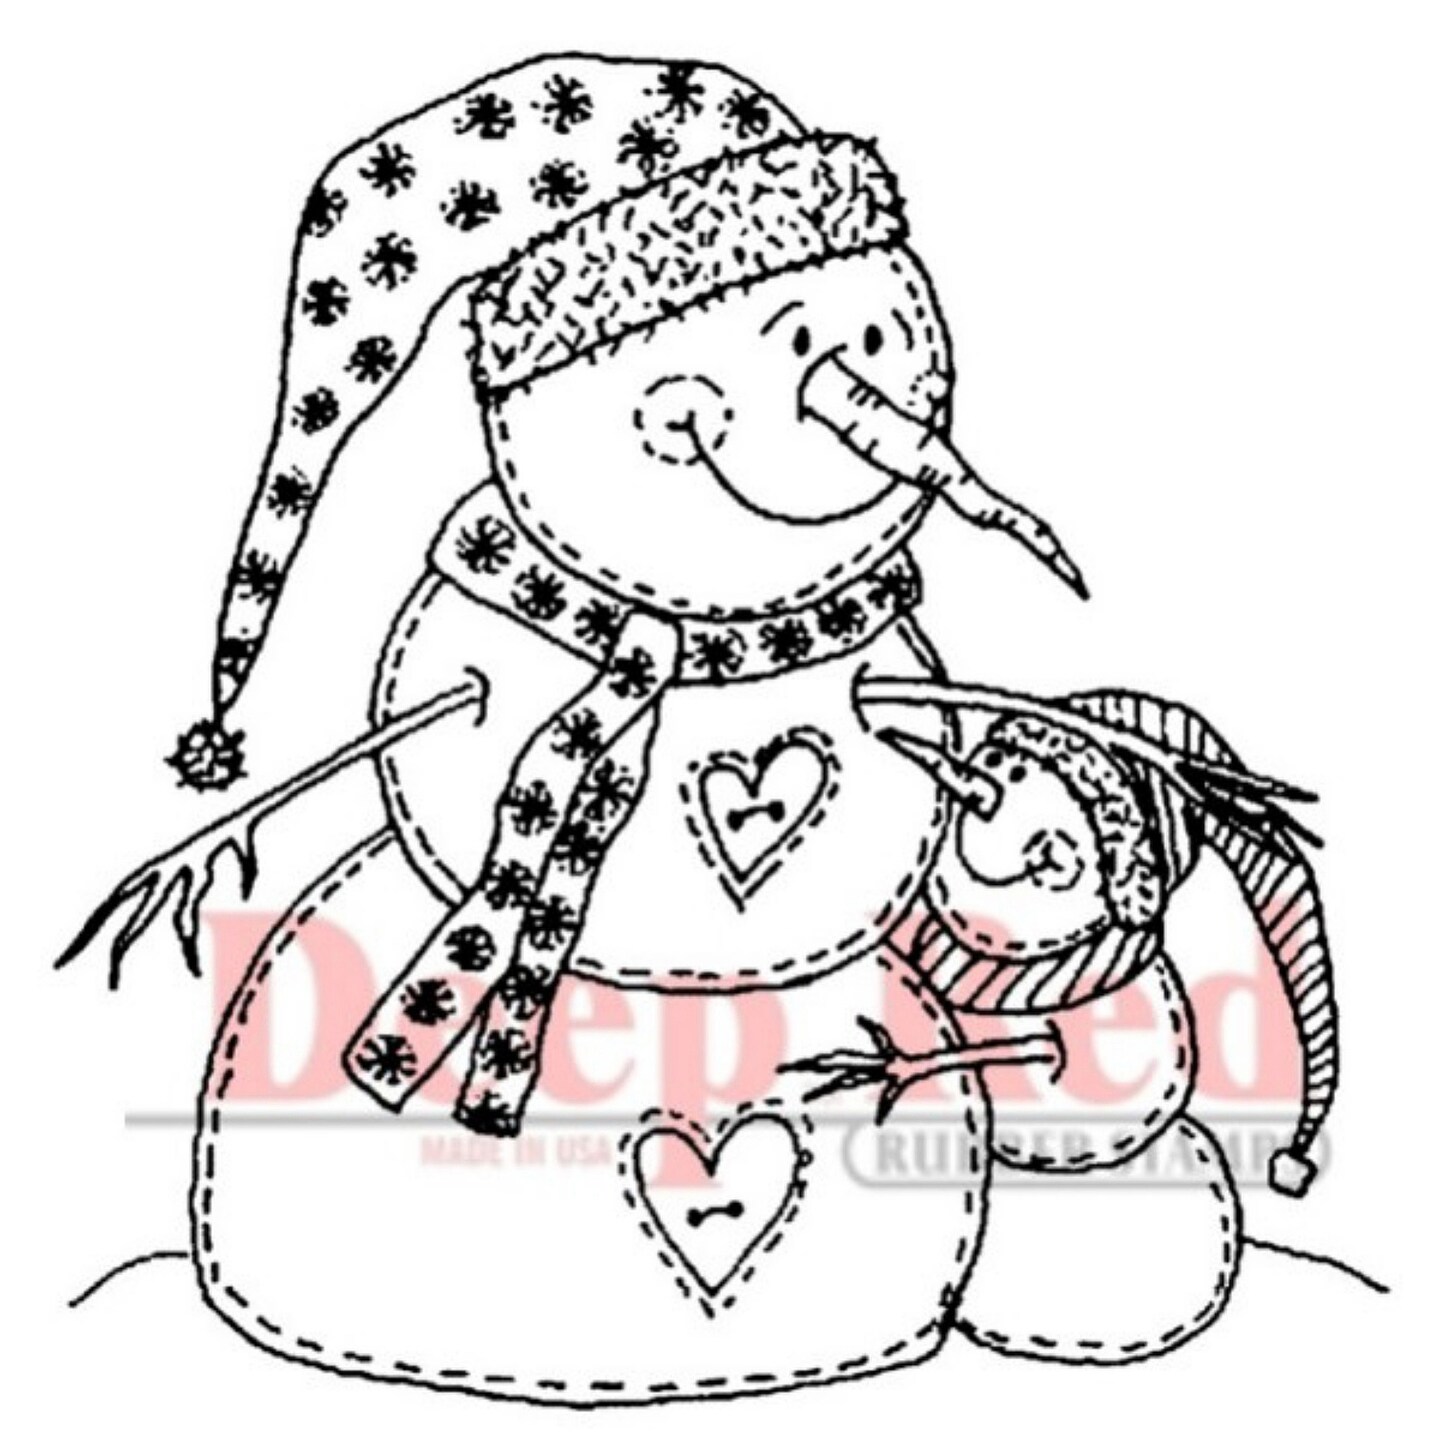 Deep Red Stamps Snowman Hugs Rubber Cling Stamp 2 x 2 inches